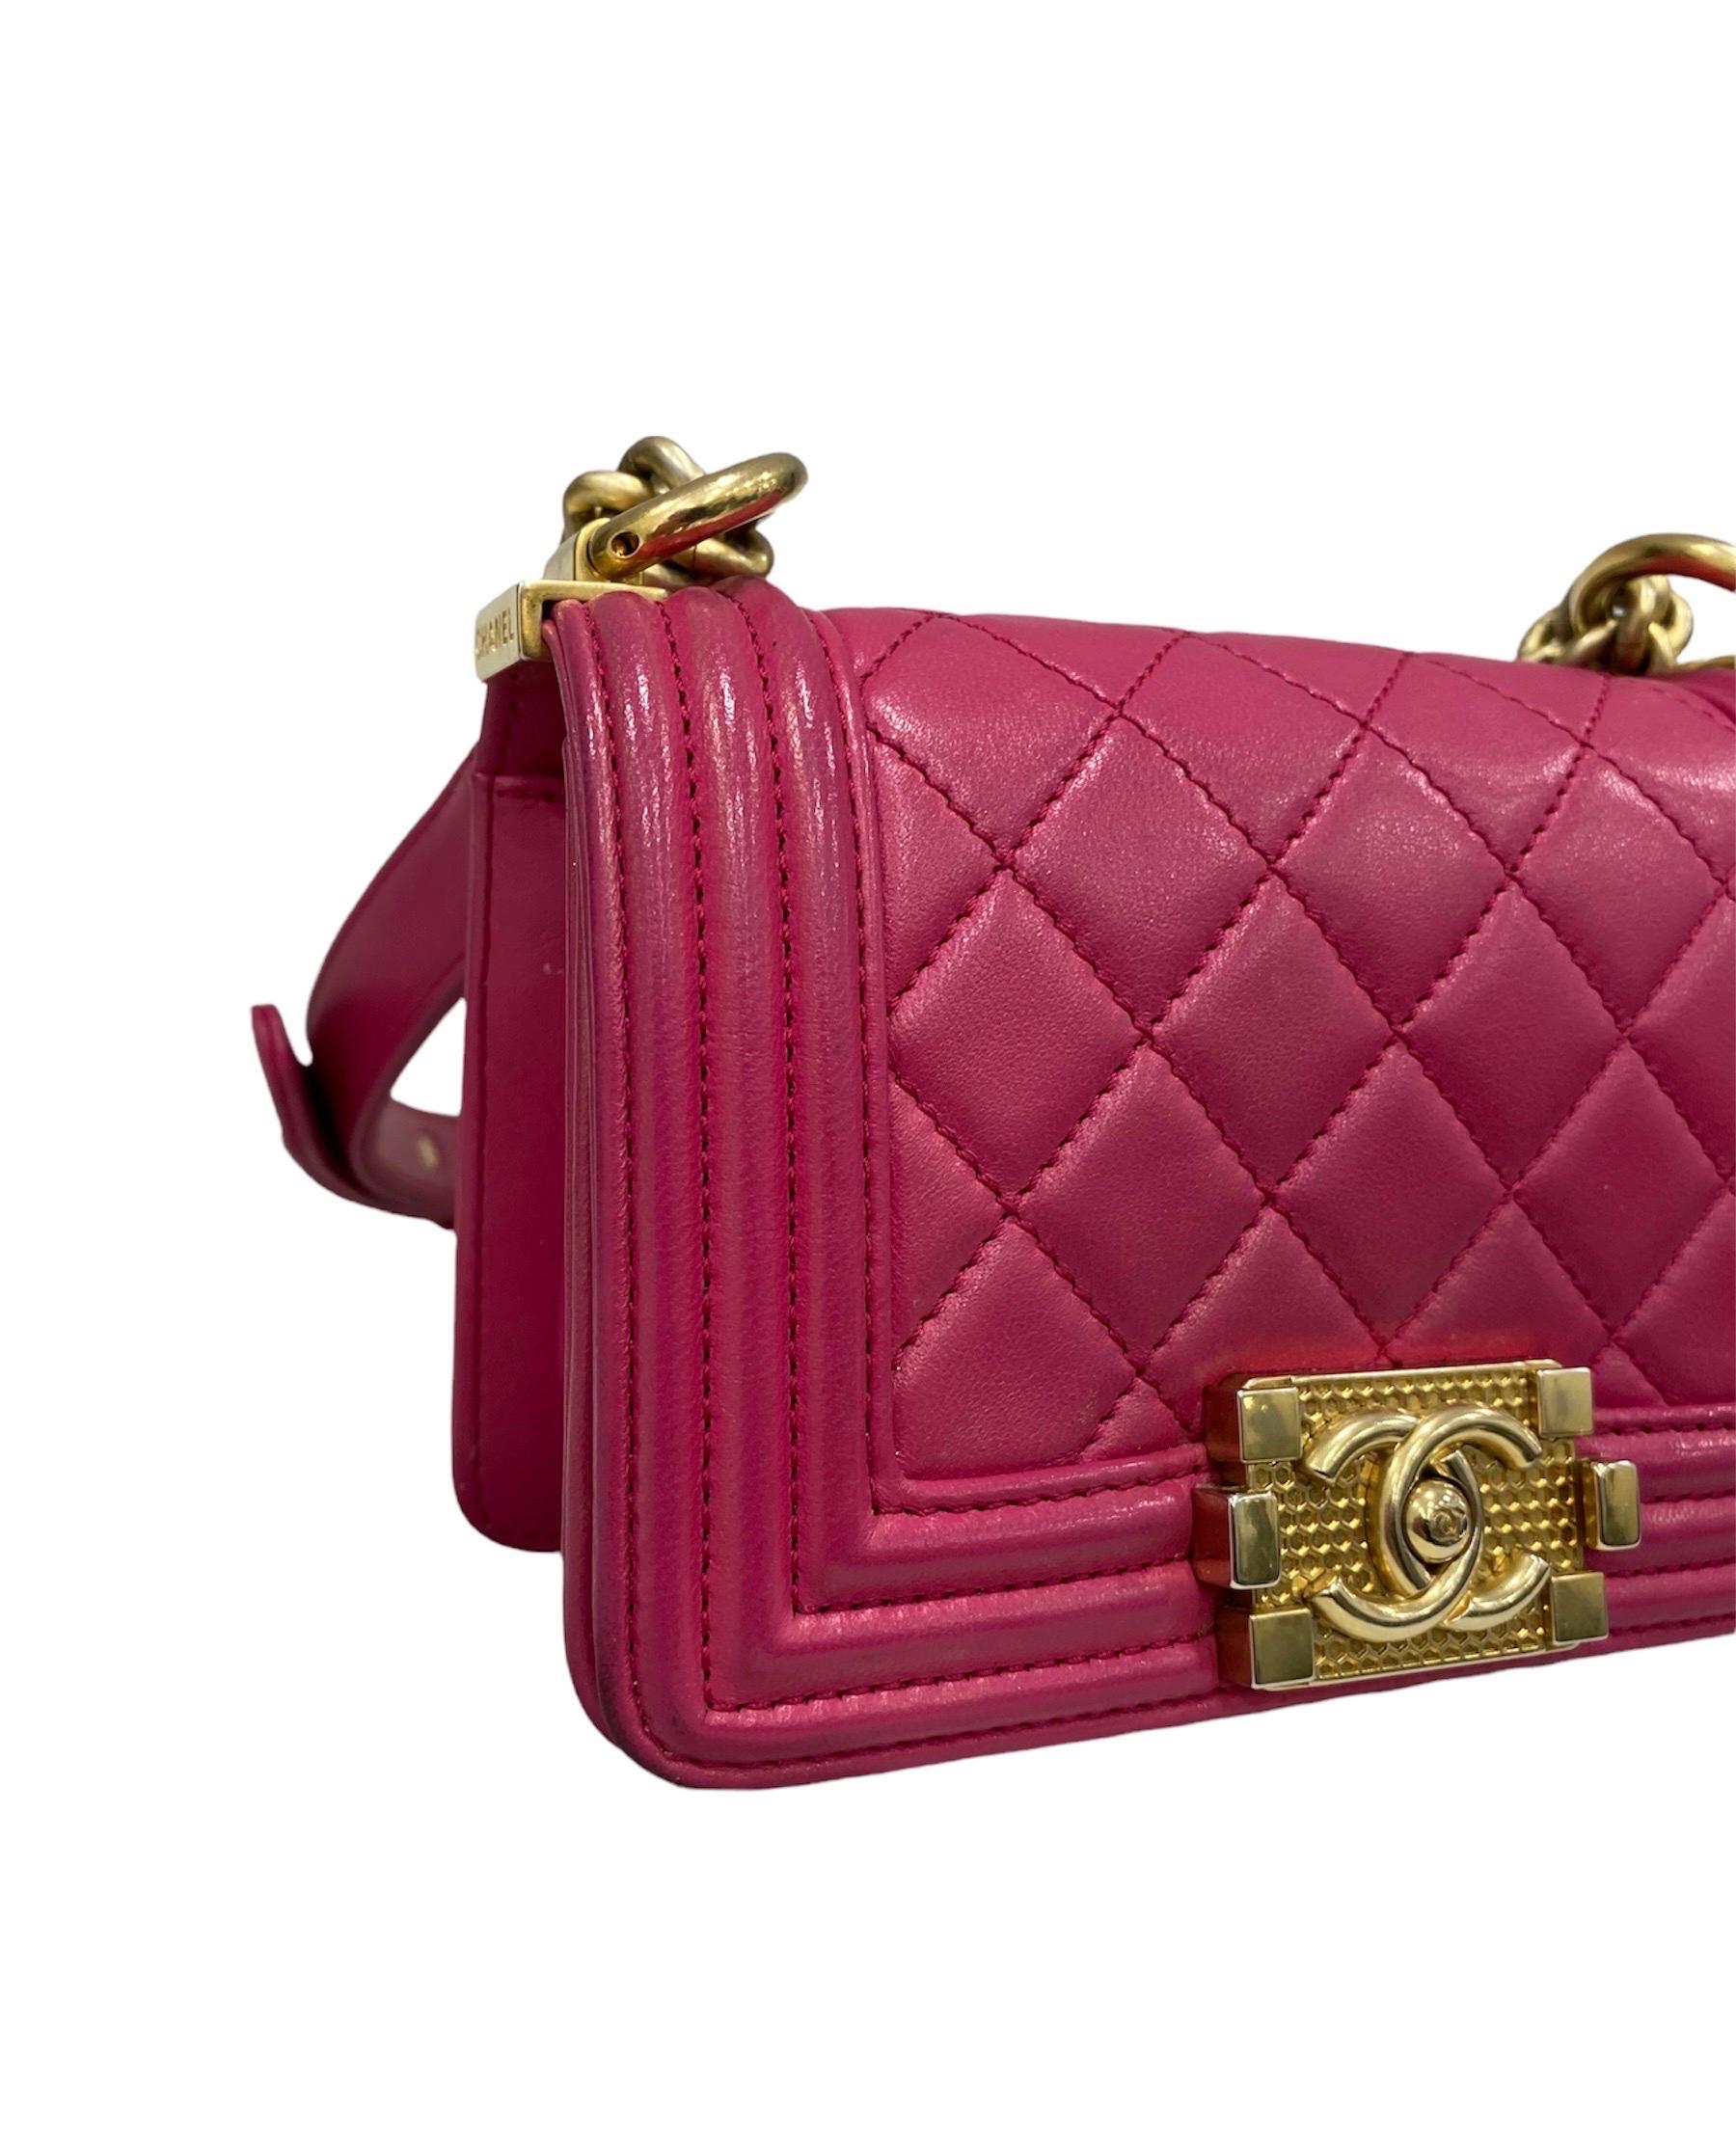 Chanel Boy Edition shoulder bag in fuchsia quilted leather with gold hardware.

Features a front flap with CC interlocking closure. The interior is lined with a soft pink fabric and has a pocket inside. It has some small spots.

The bag features a